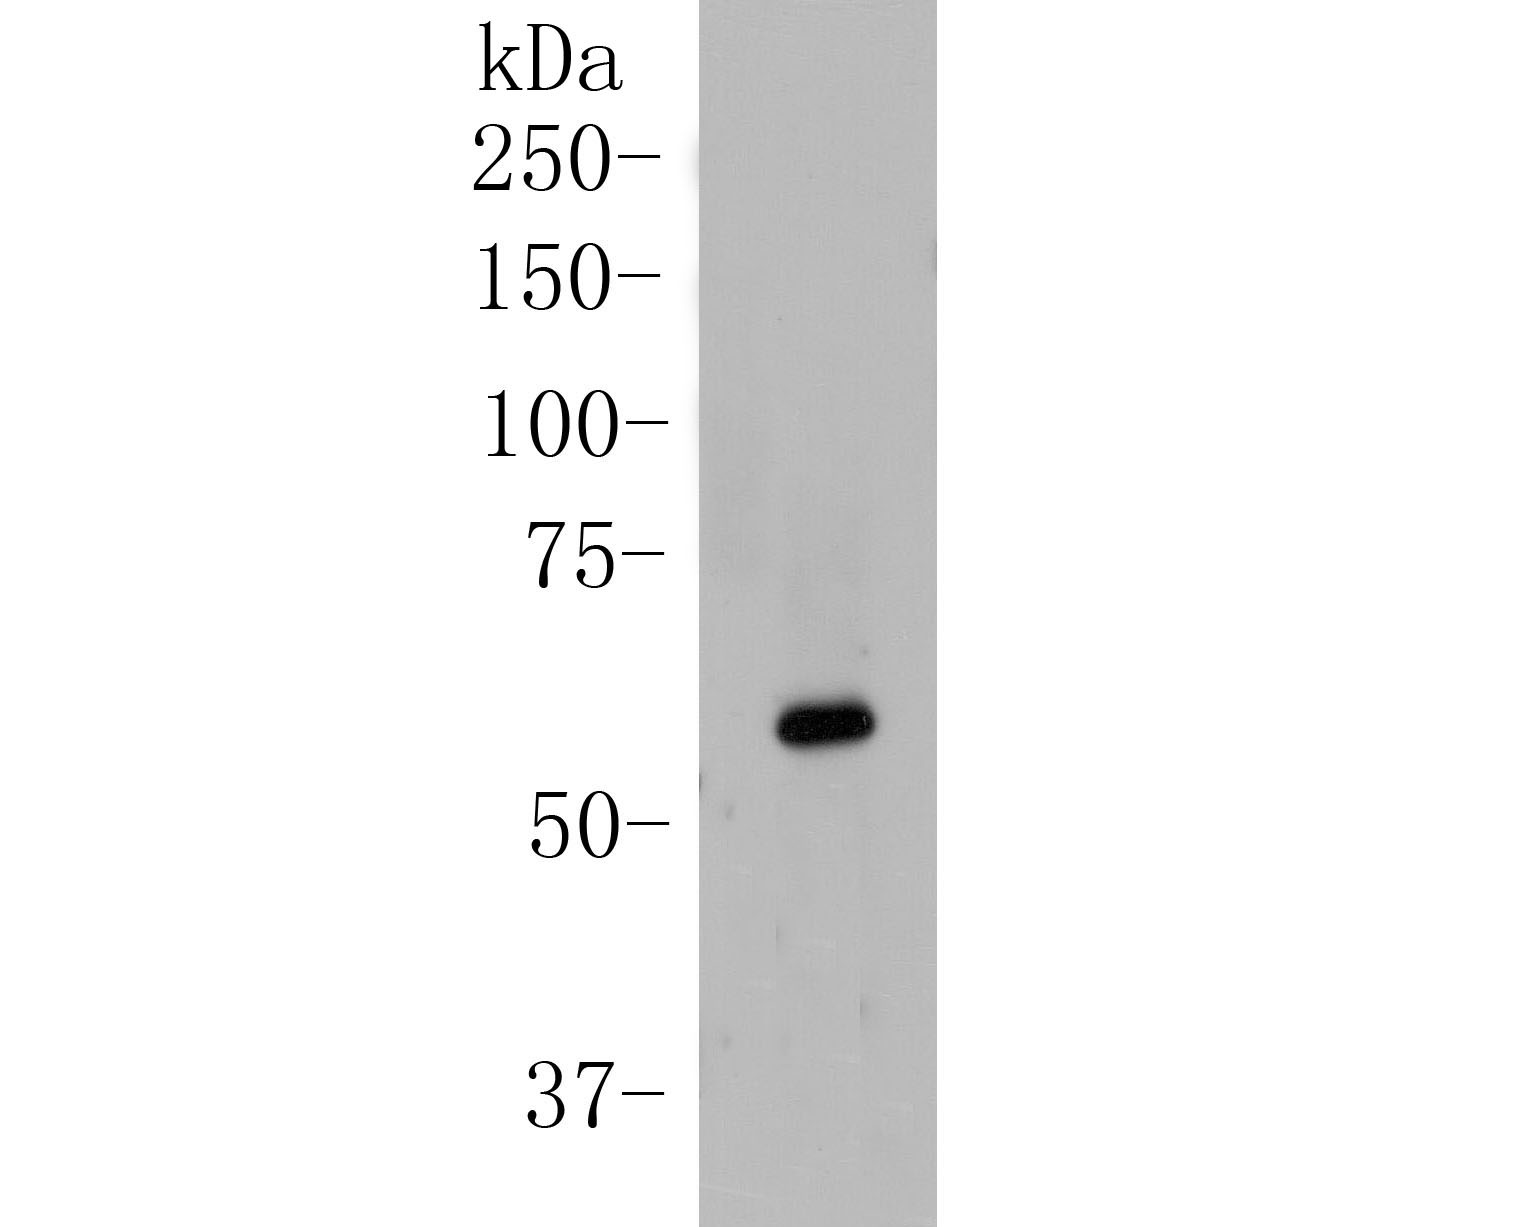 Western blot analysis of Phospho-Src(Y419) on A549 cell lysate. Proteins were transferred to a PVDF membrane and blocked with 5% BSA in PBS for 1 hour at room temperature. The primary antibody (ET1609-15, 1/500) was used in 5% BSA at room temperature for 2 hours. Goat Anti-Rabbit IgG - HRP Secondary Antibody (HA1001) at 1:5,000 dilution was used for 1 hour at room temperature.